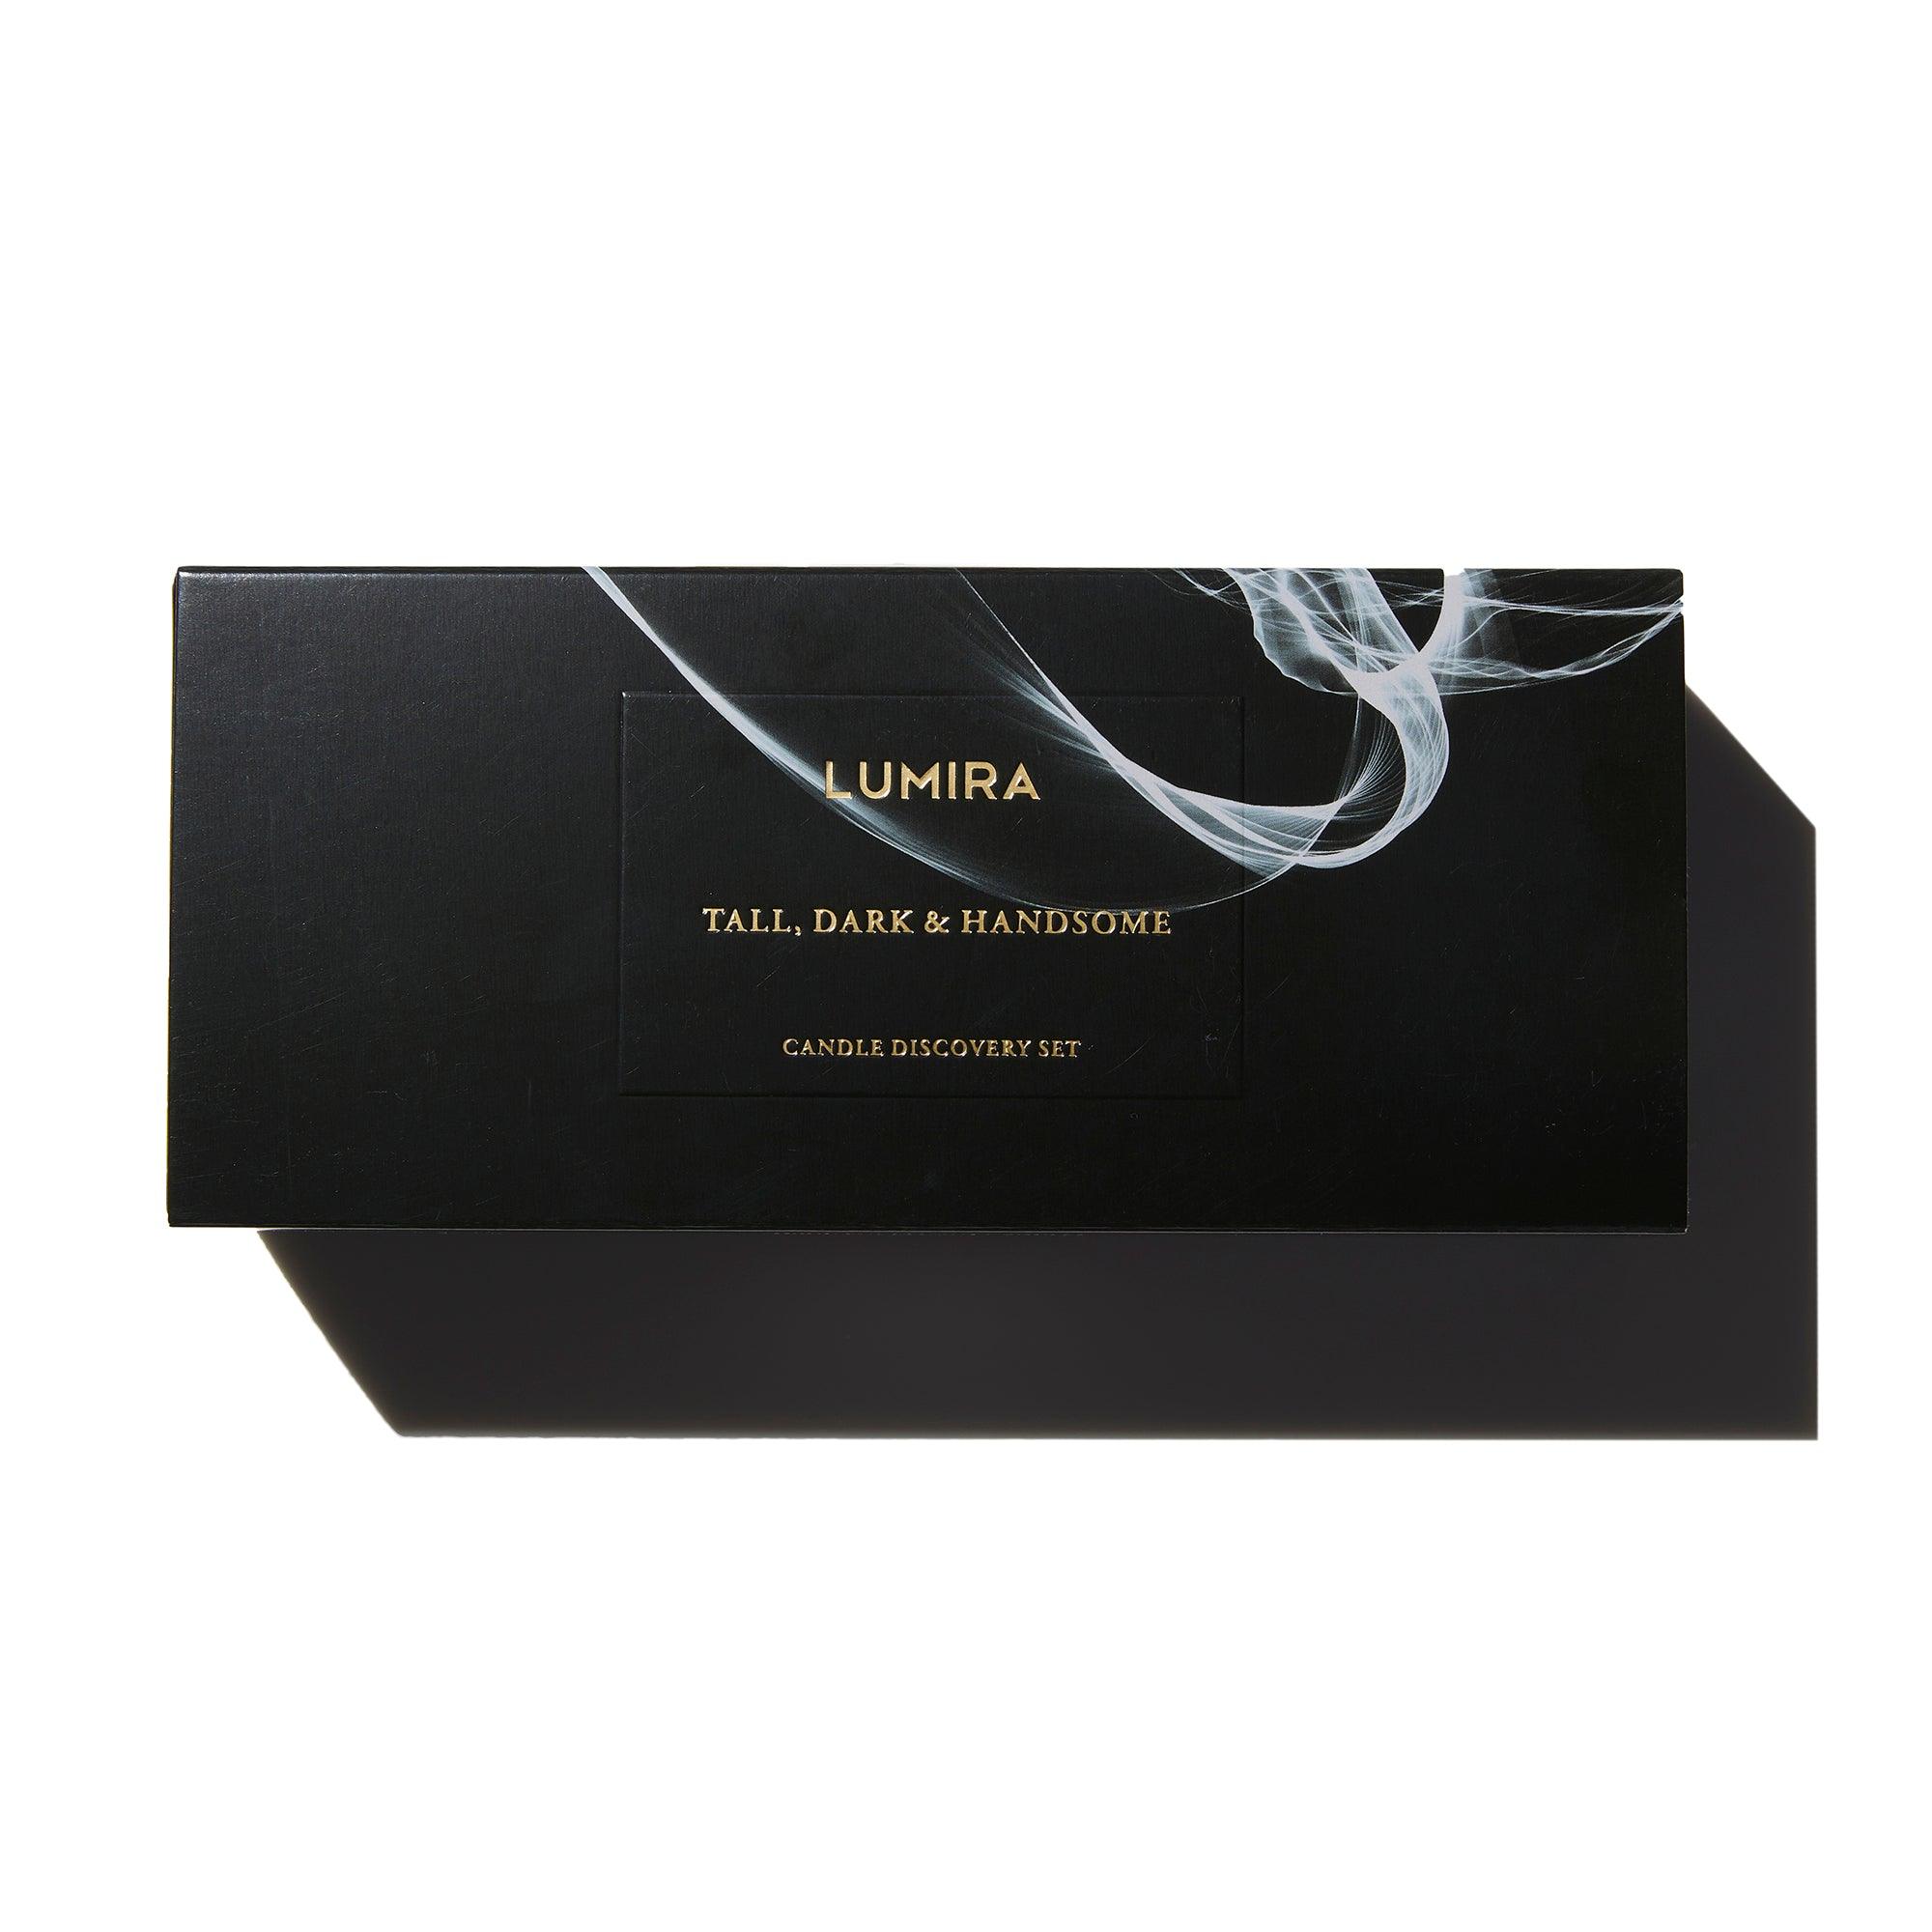 Tall, Dark & Handsome Candle Discovery Set - LUMIRA